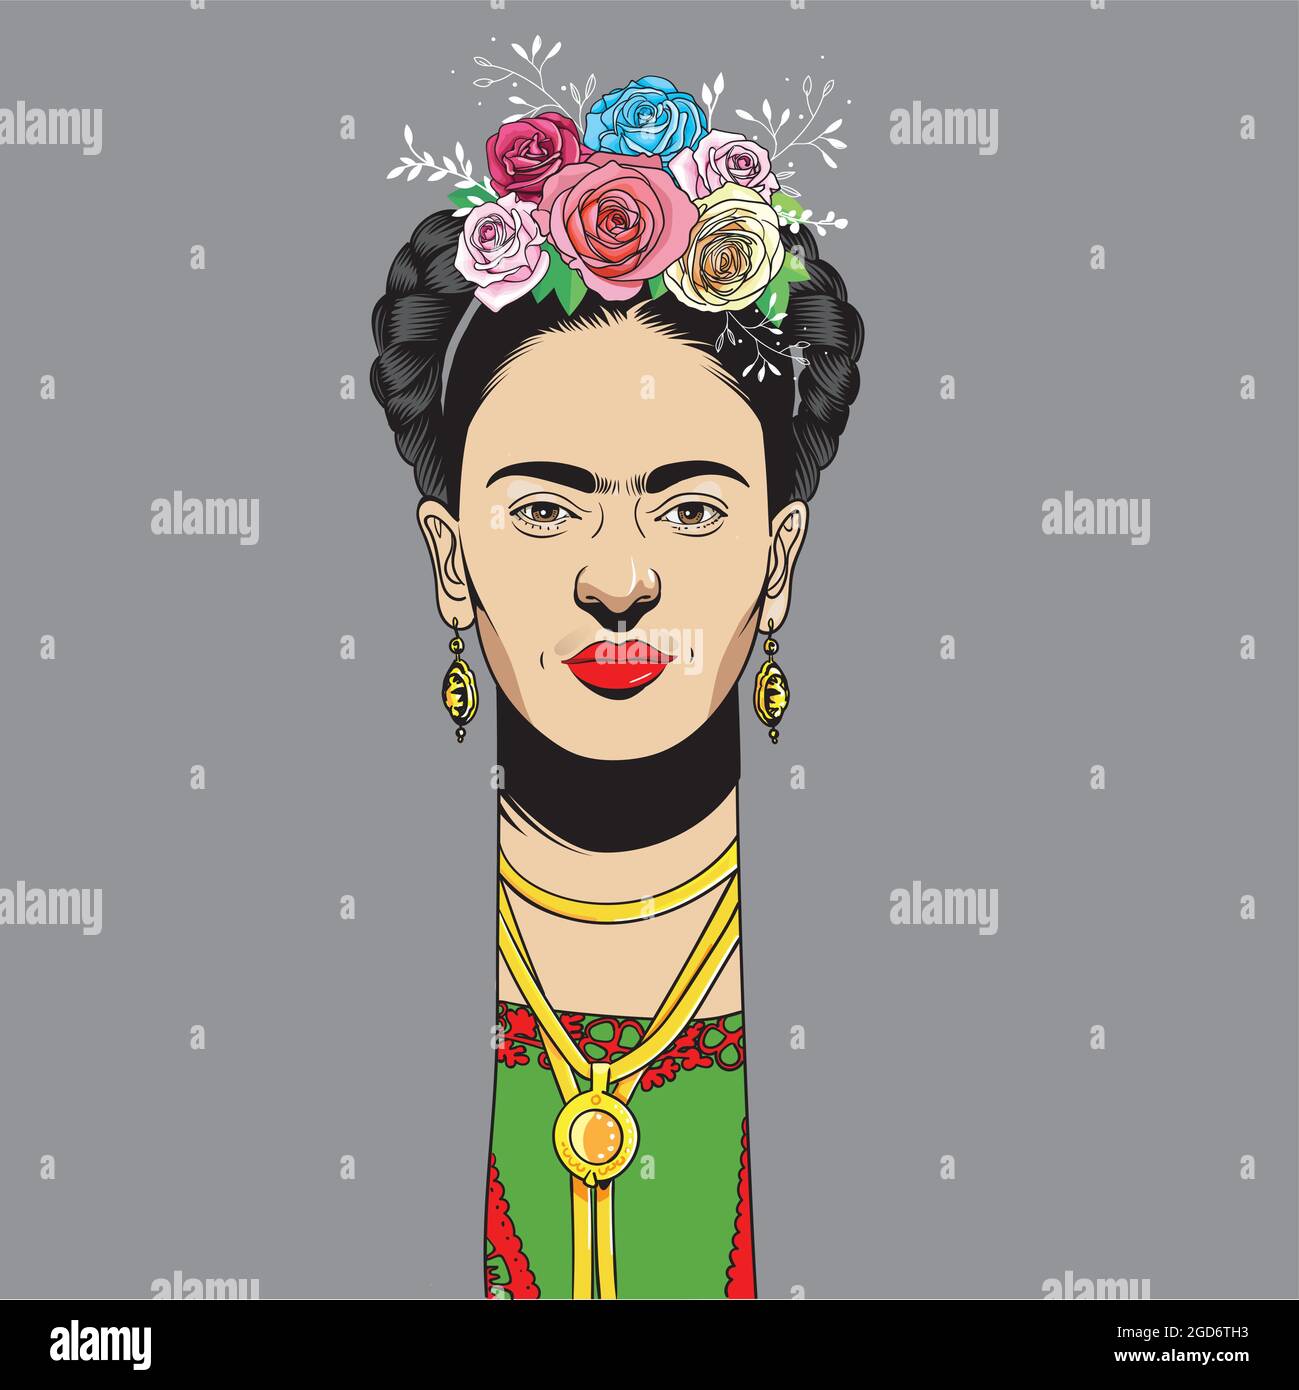 Frida Kahlo cartoon style portrait, She was a Mexican painter known for her many portraits, self-portraits, and works inspired by the nature and artif Stock Vector